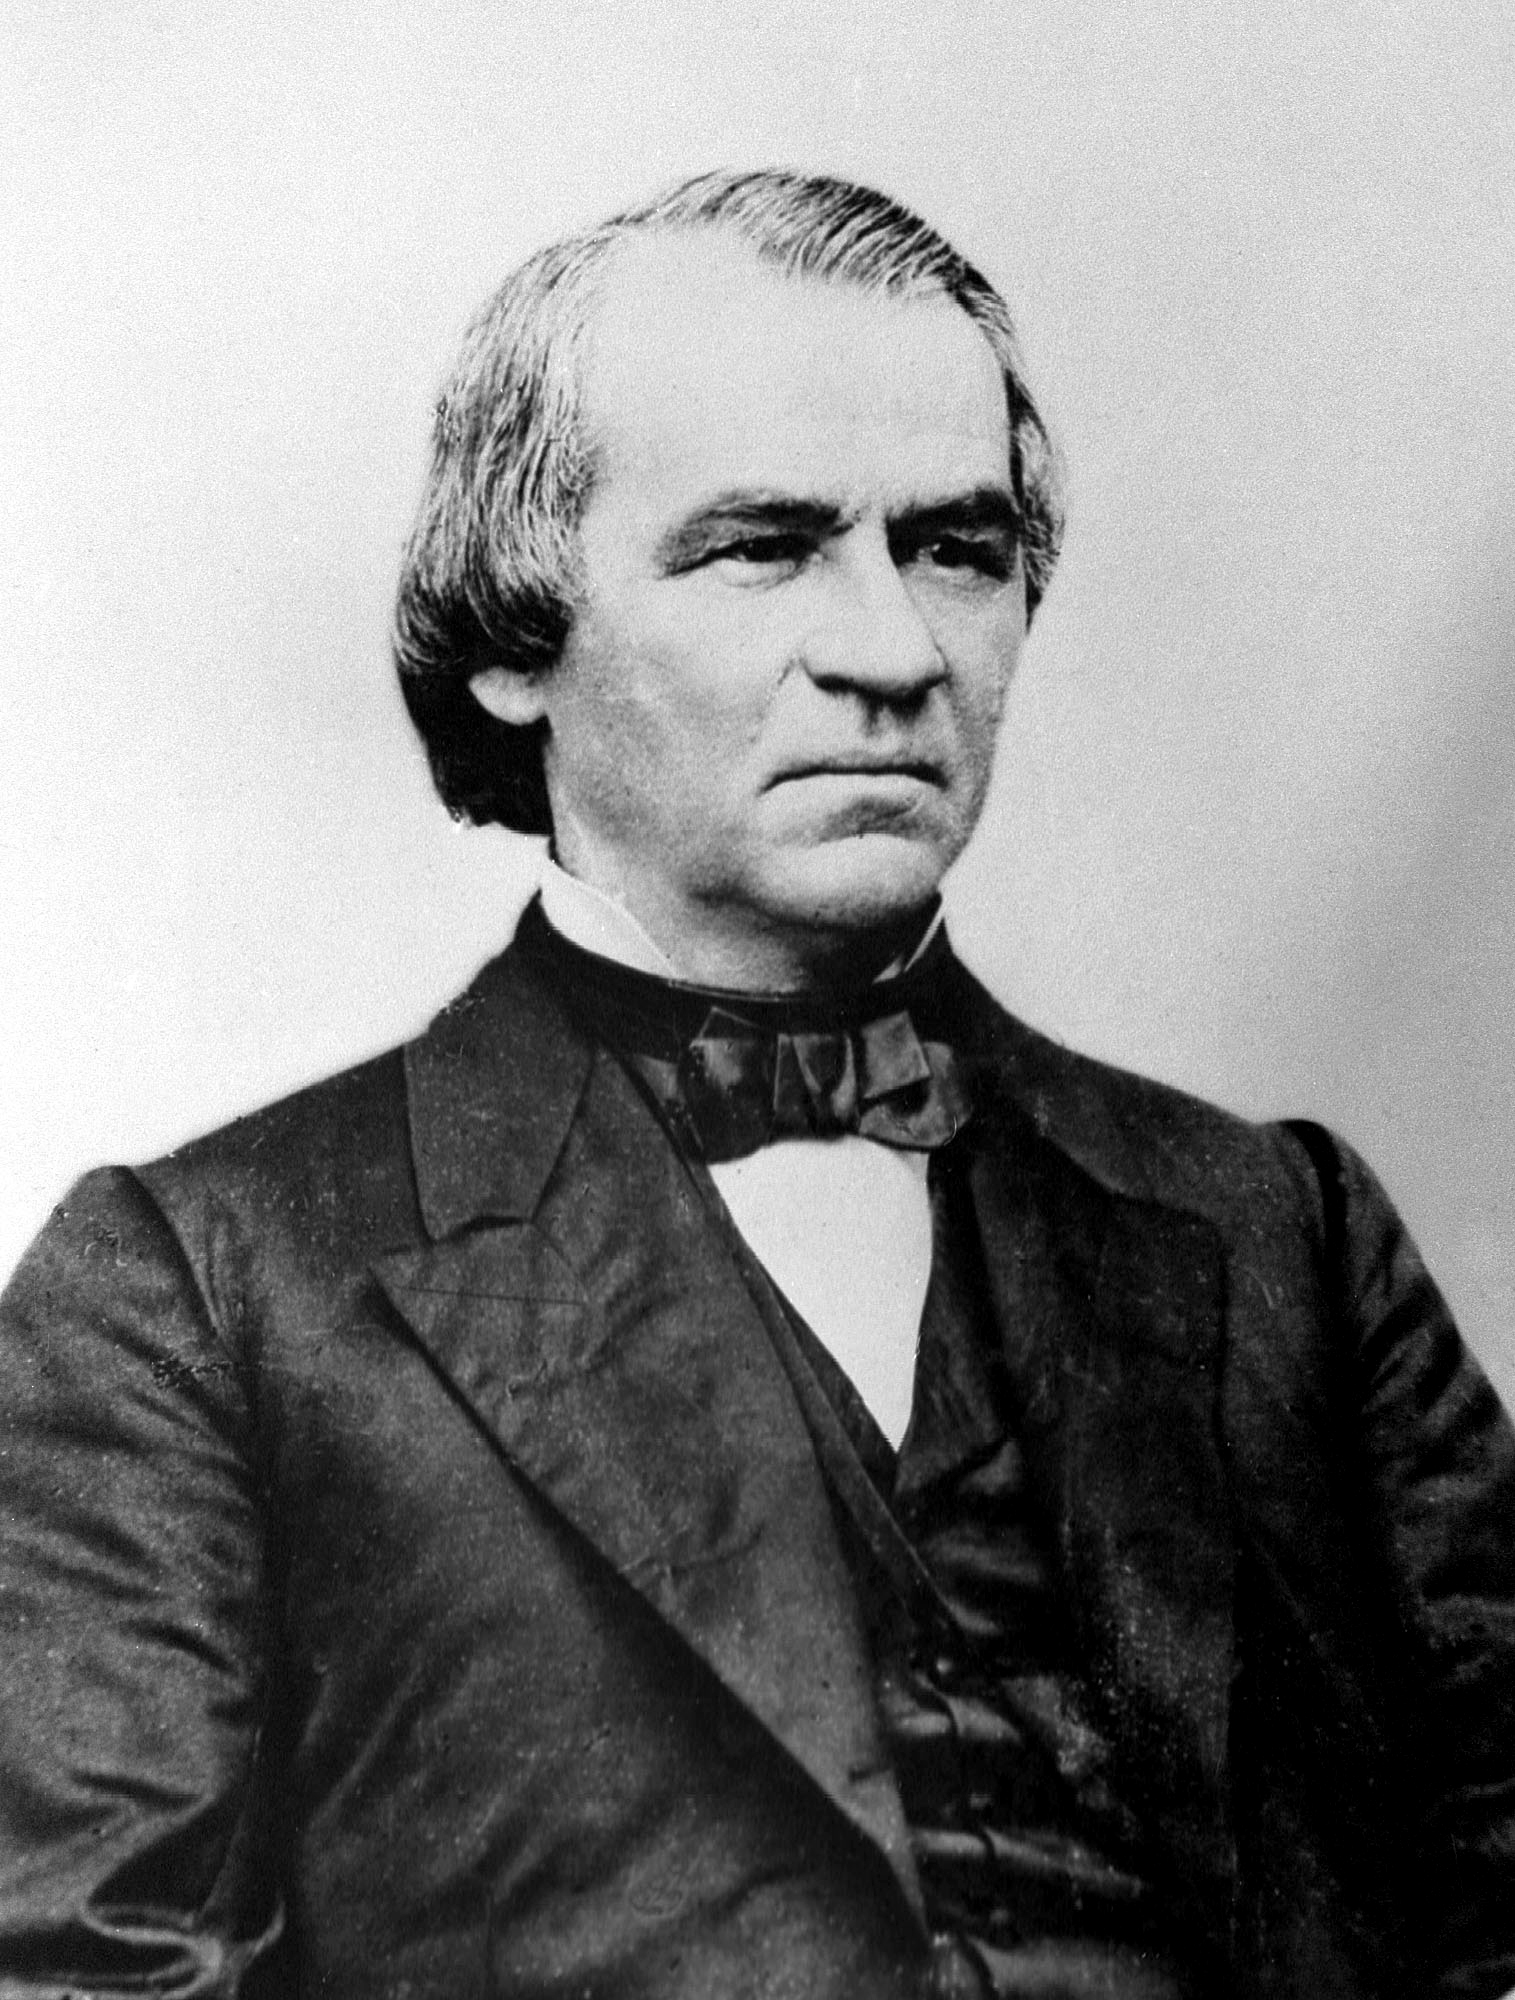 PHOTO: An engraving showing President Andrew Johnson in 1868.